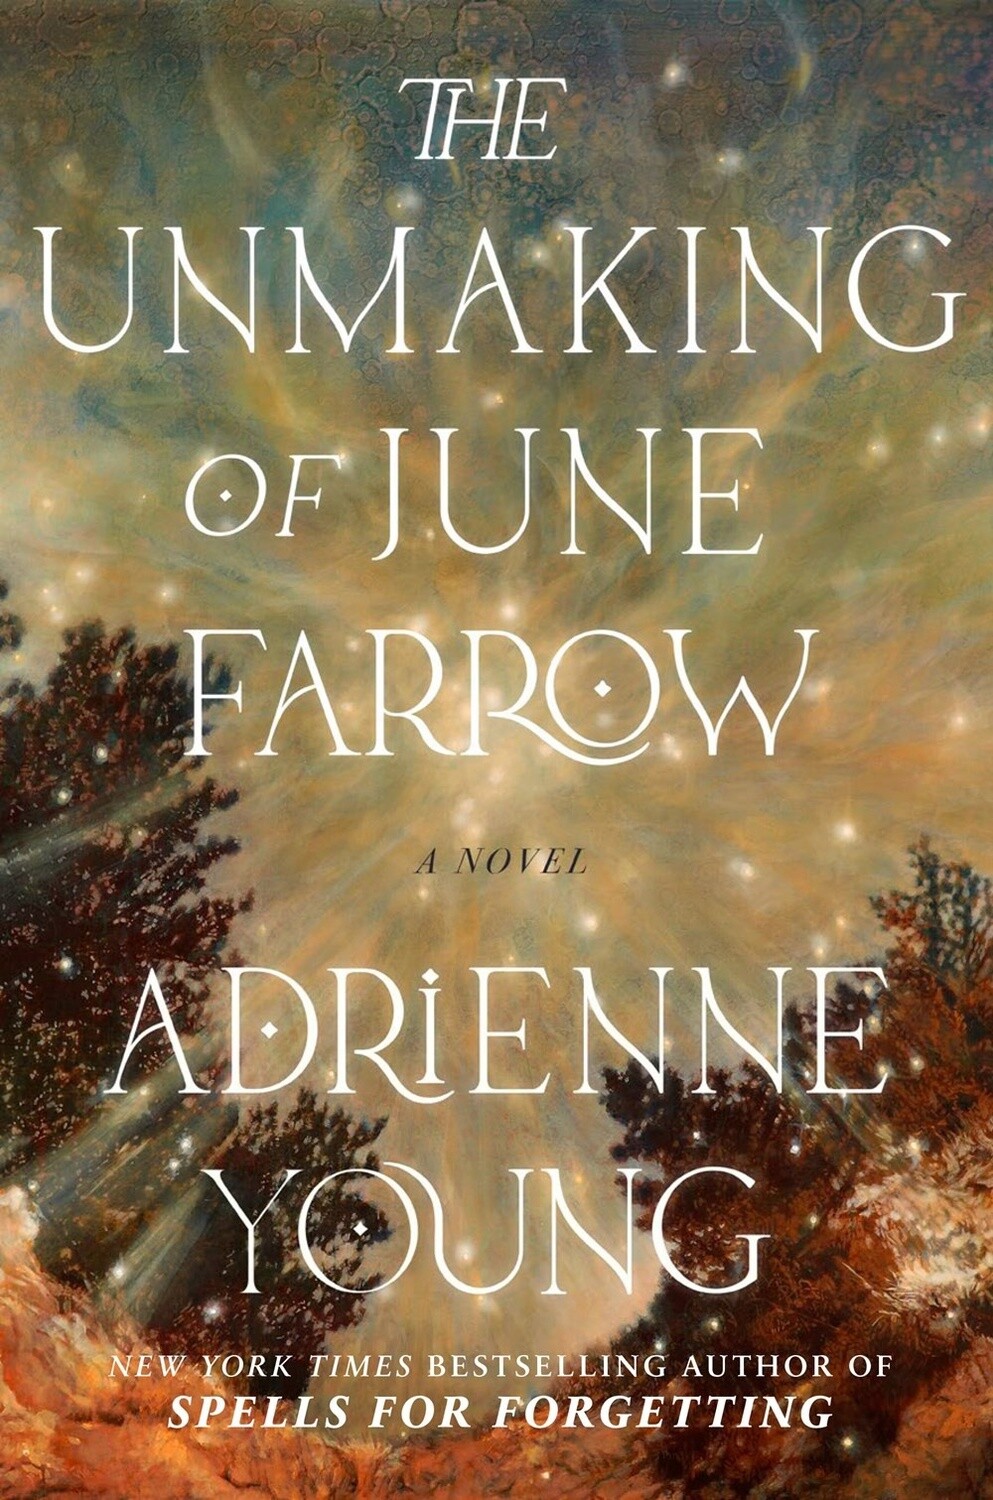 The Unmaking of June Farrow (Hardcover)